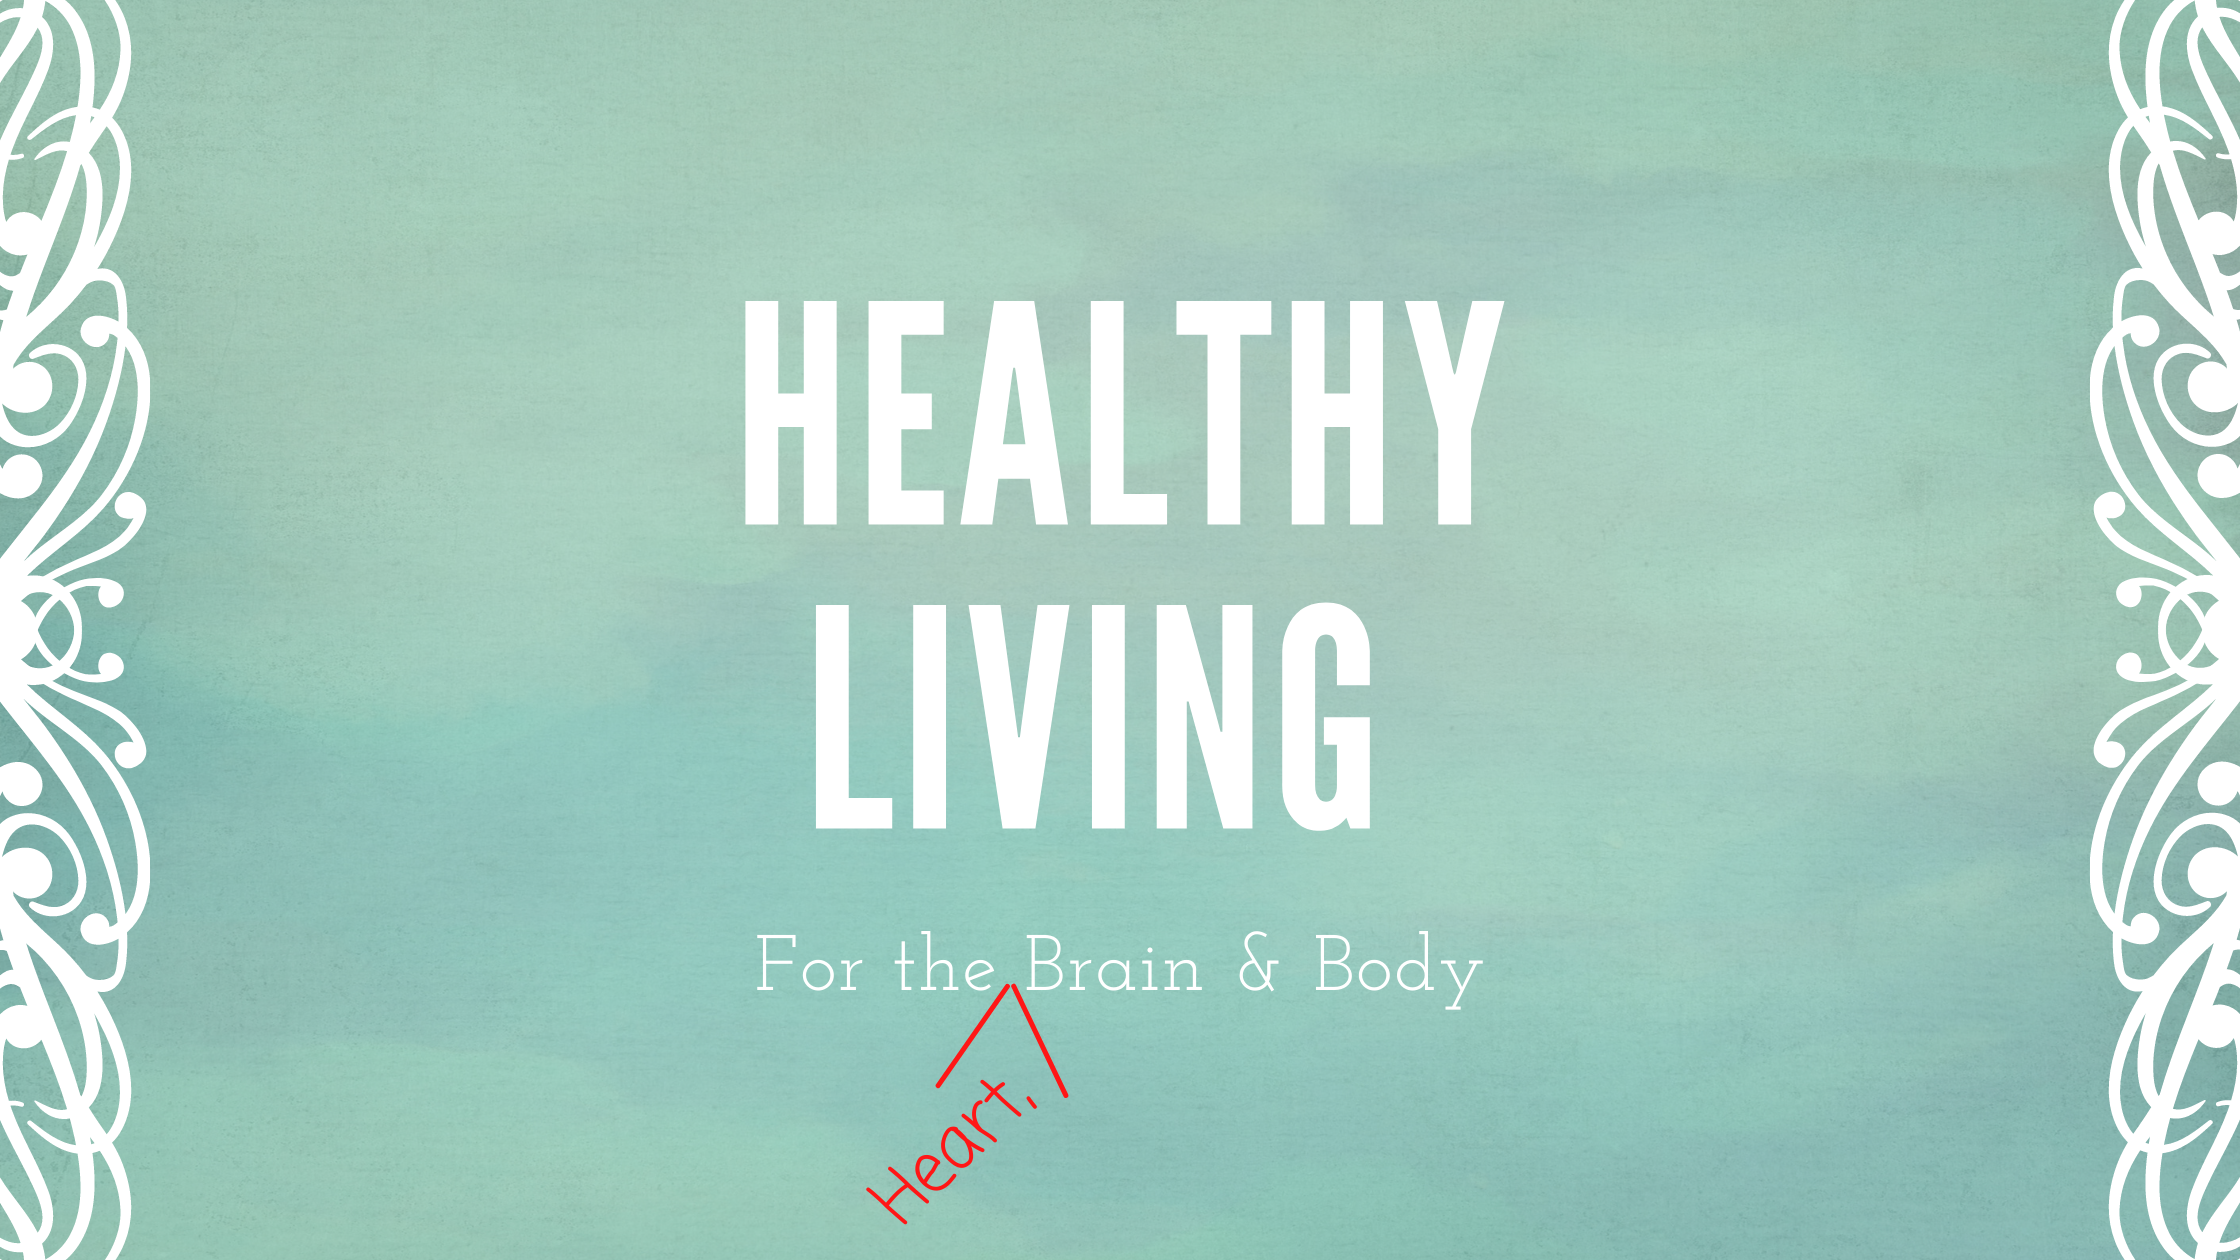 Healthy Living For The Heart, Brain and Body